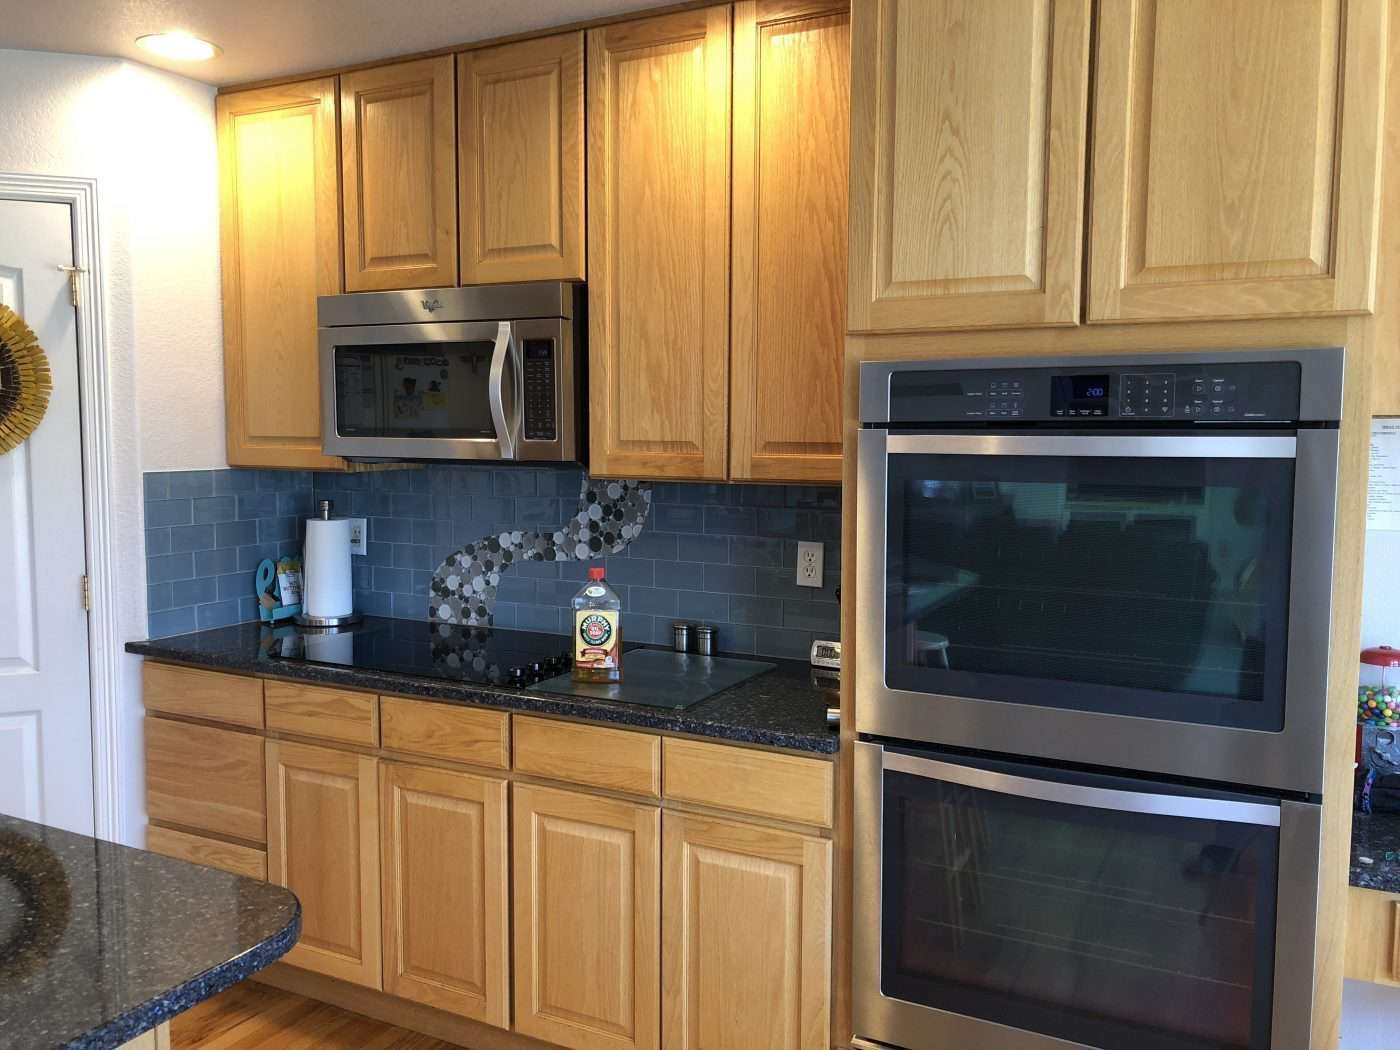 Best Way To Clean Kitchen Cabinets: Quick and Easy